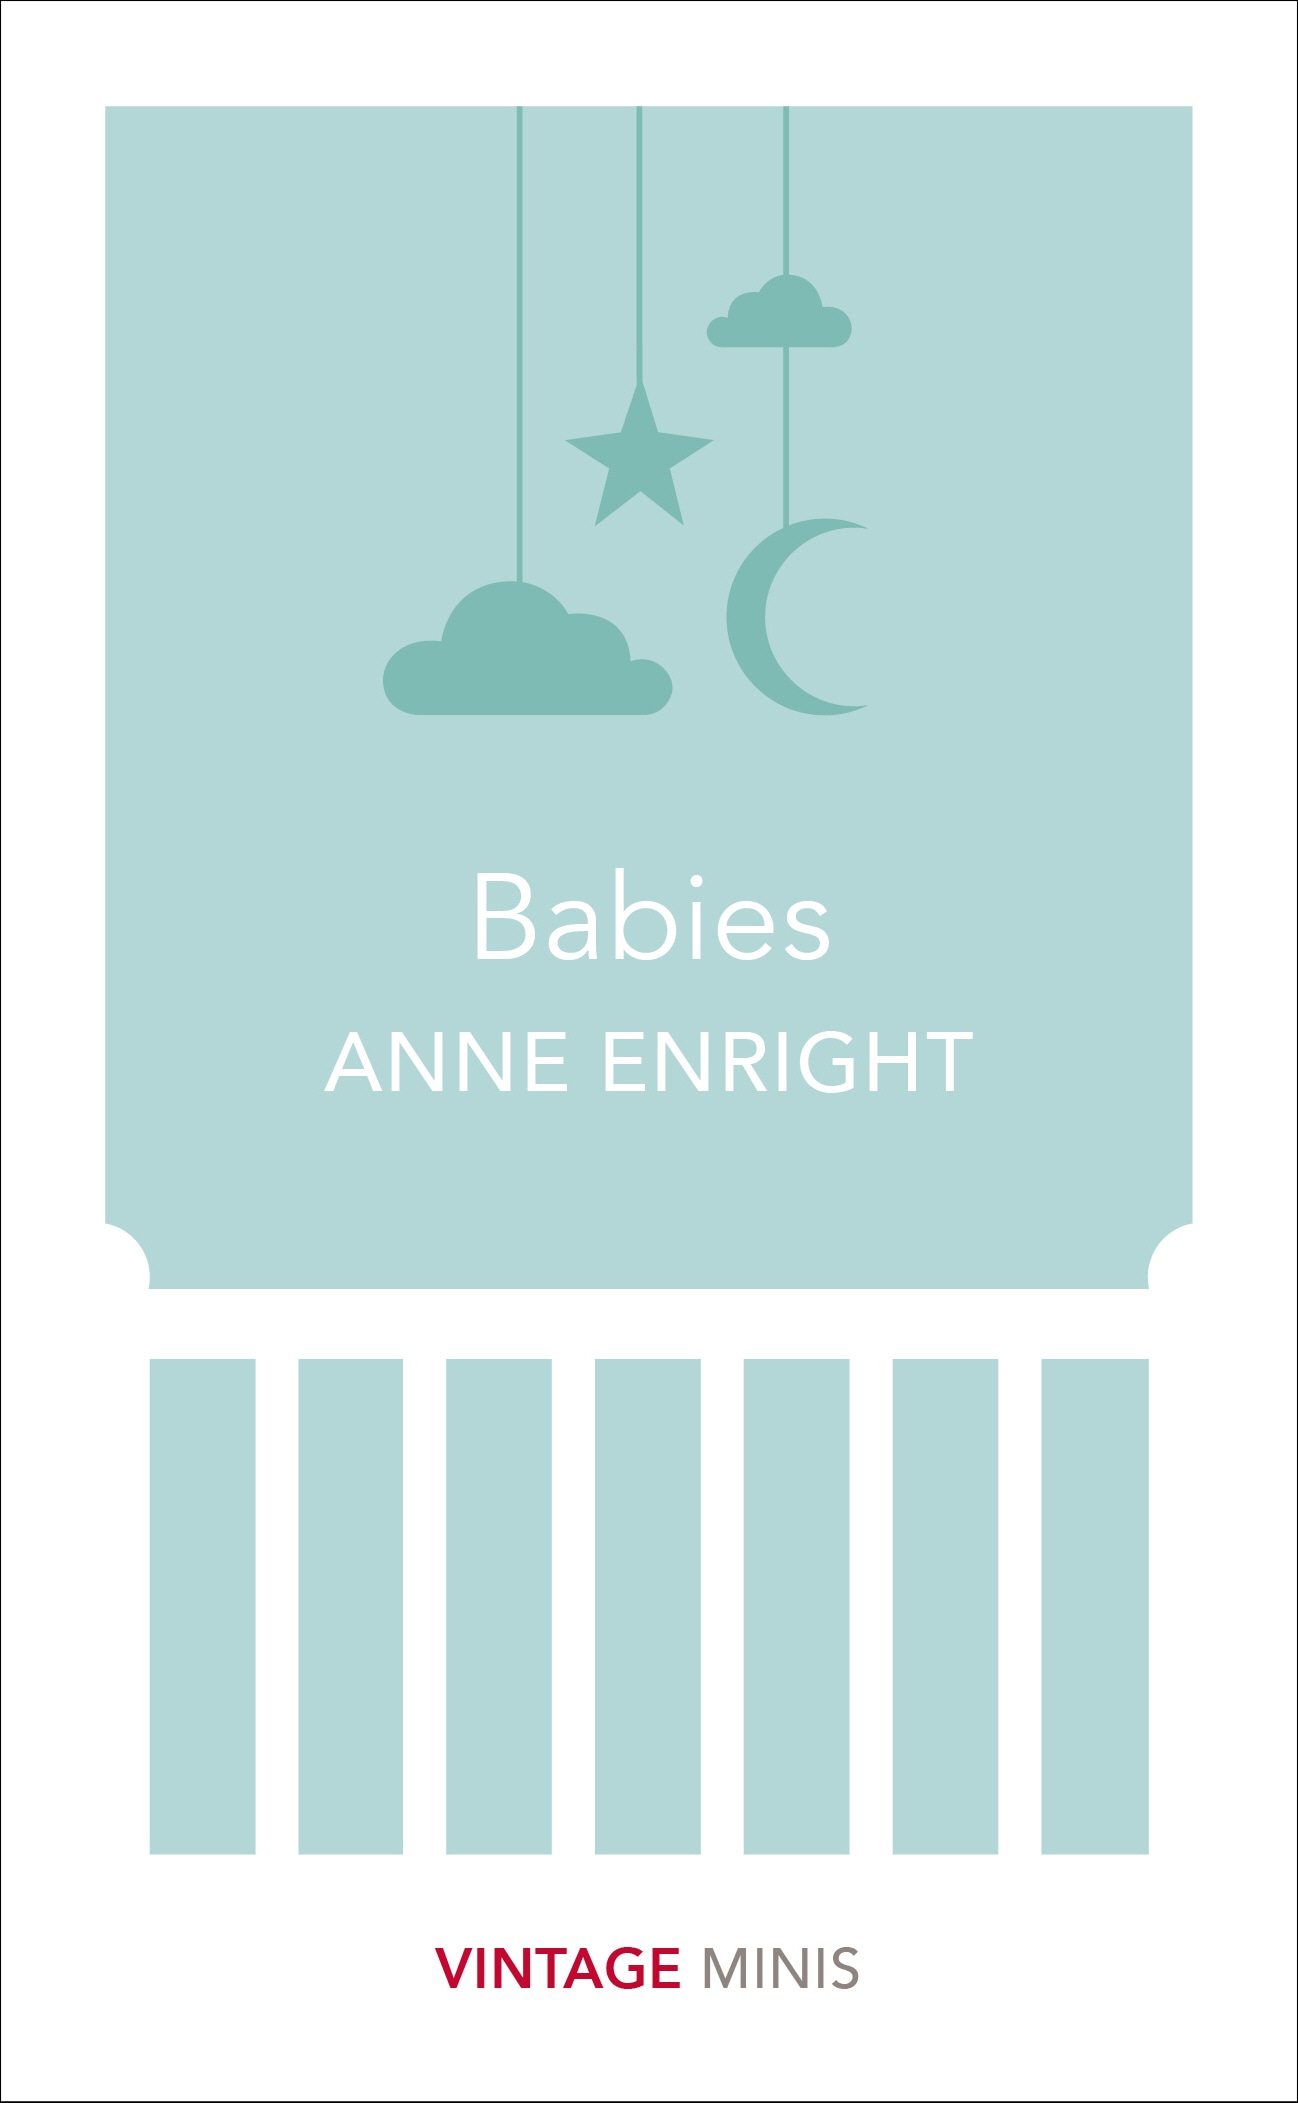 Book “Babies” by Anne Enright — June 8, 2017